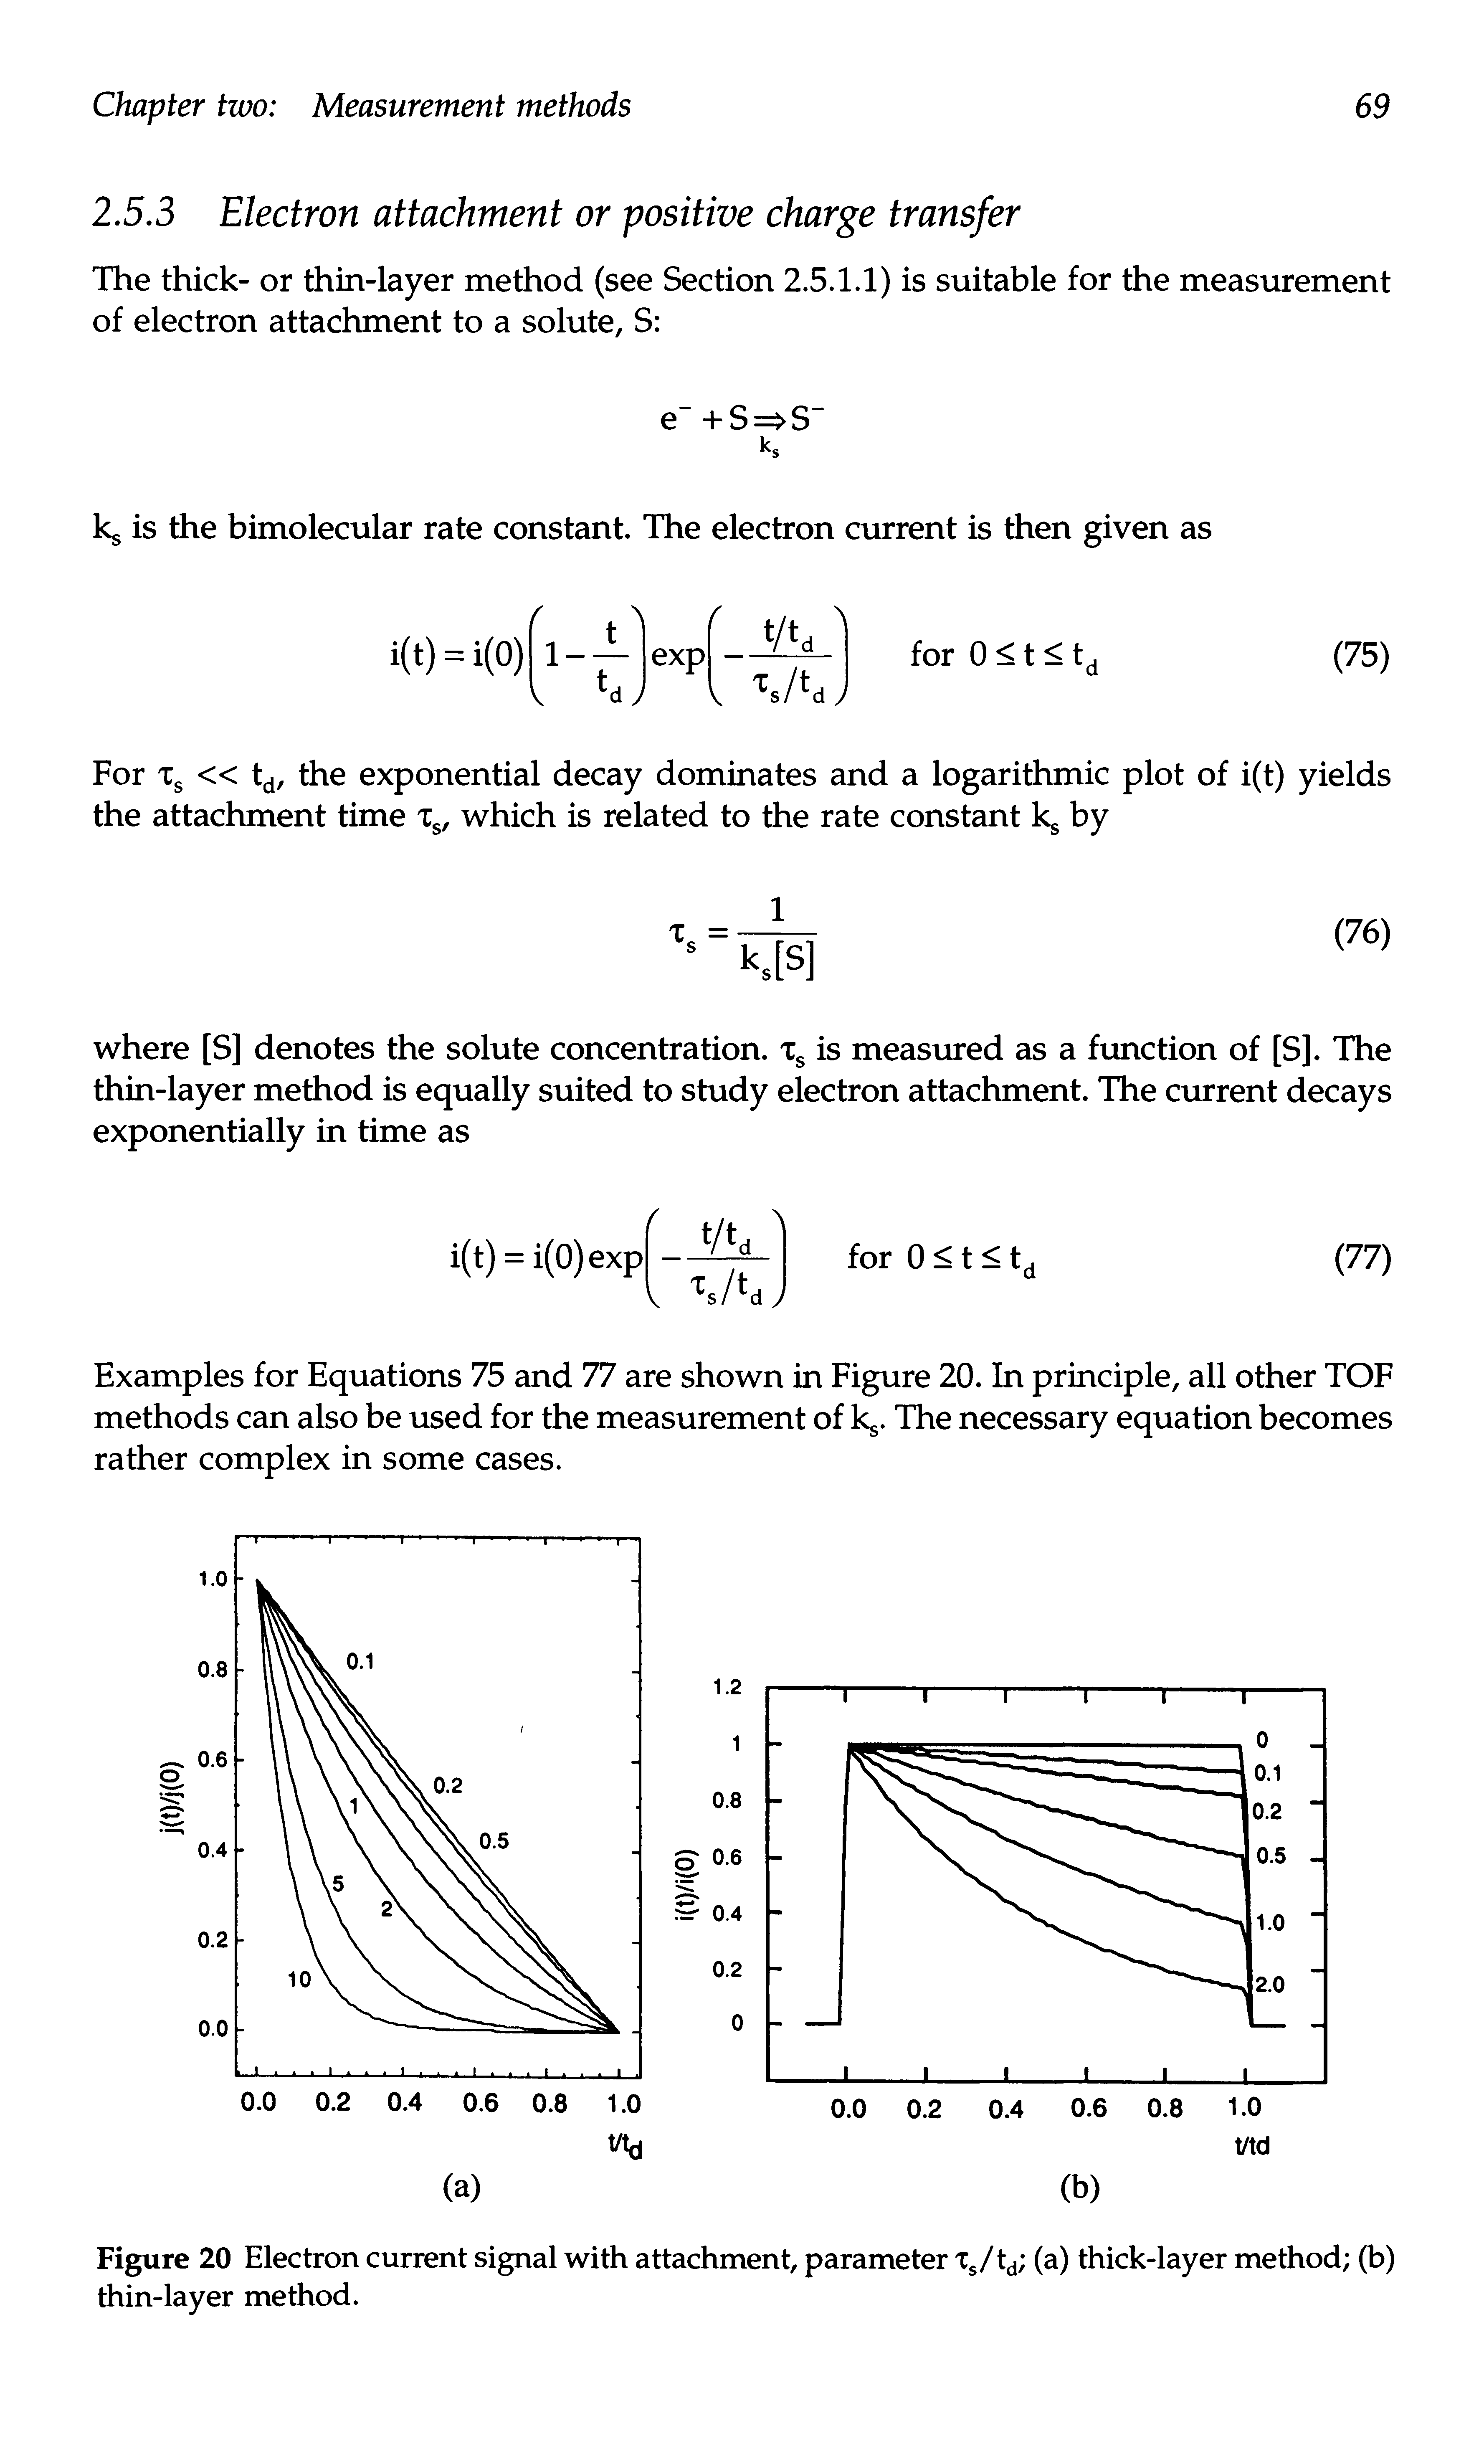 Figure 20 Electron current signal with attachment, parameter Xs/t (a) thick-layer method (b) thin-layer method.